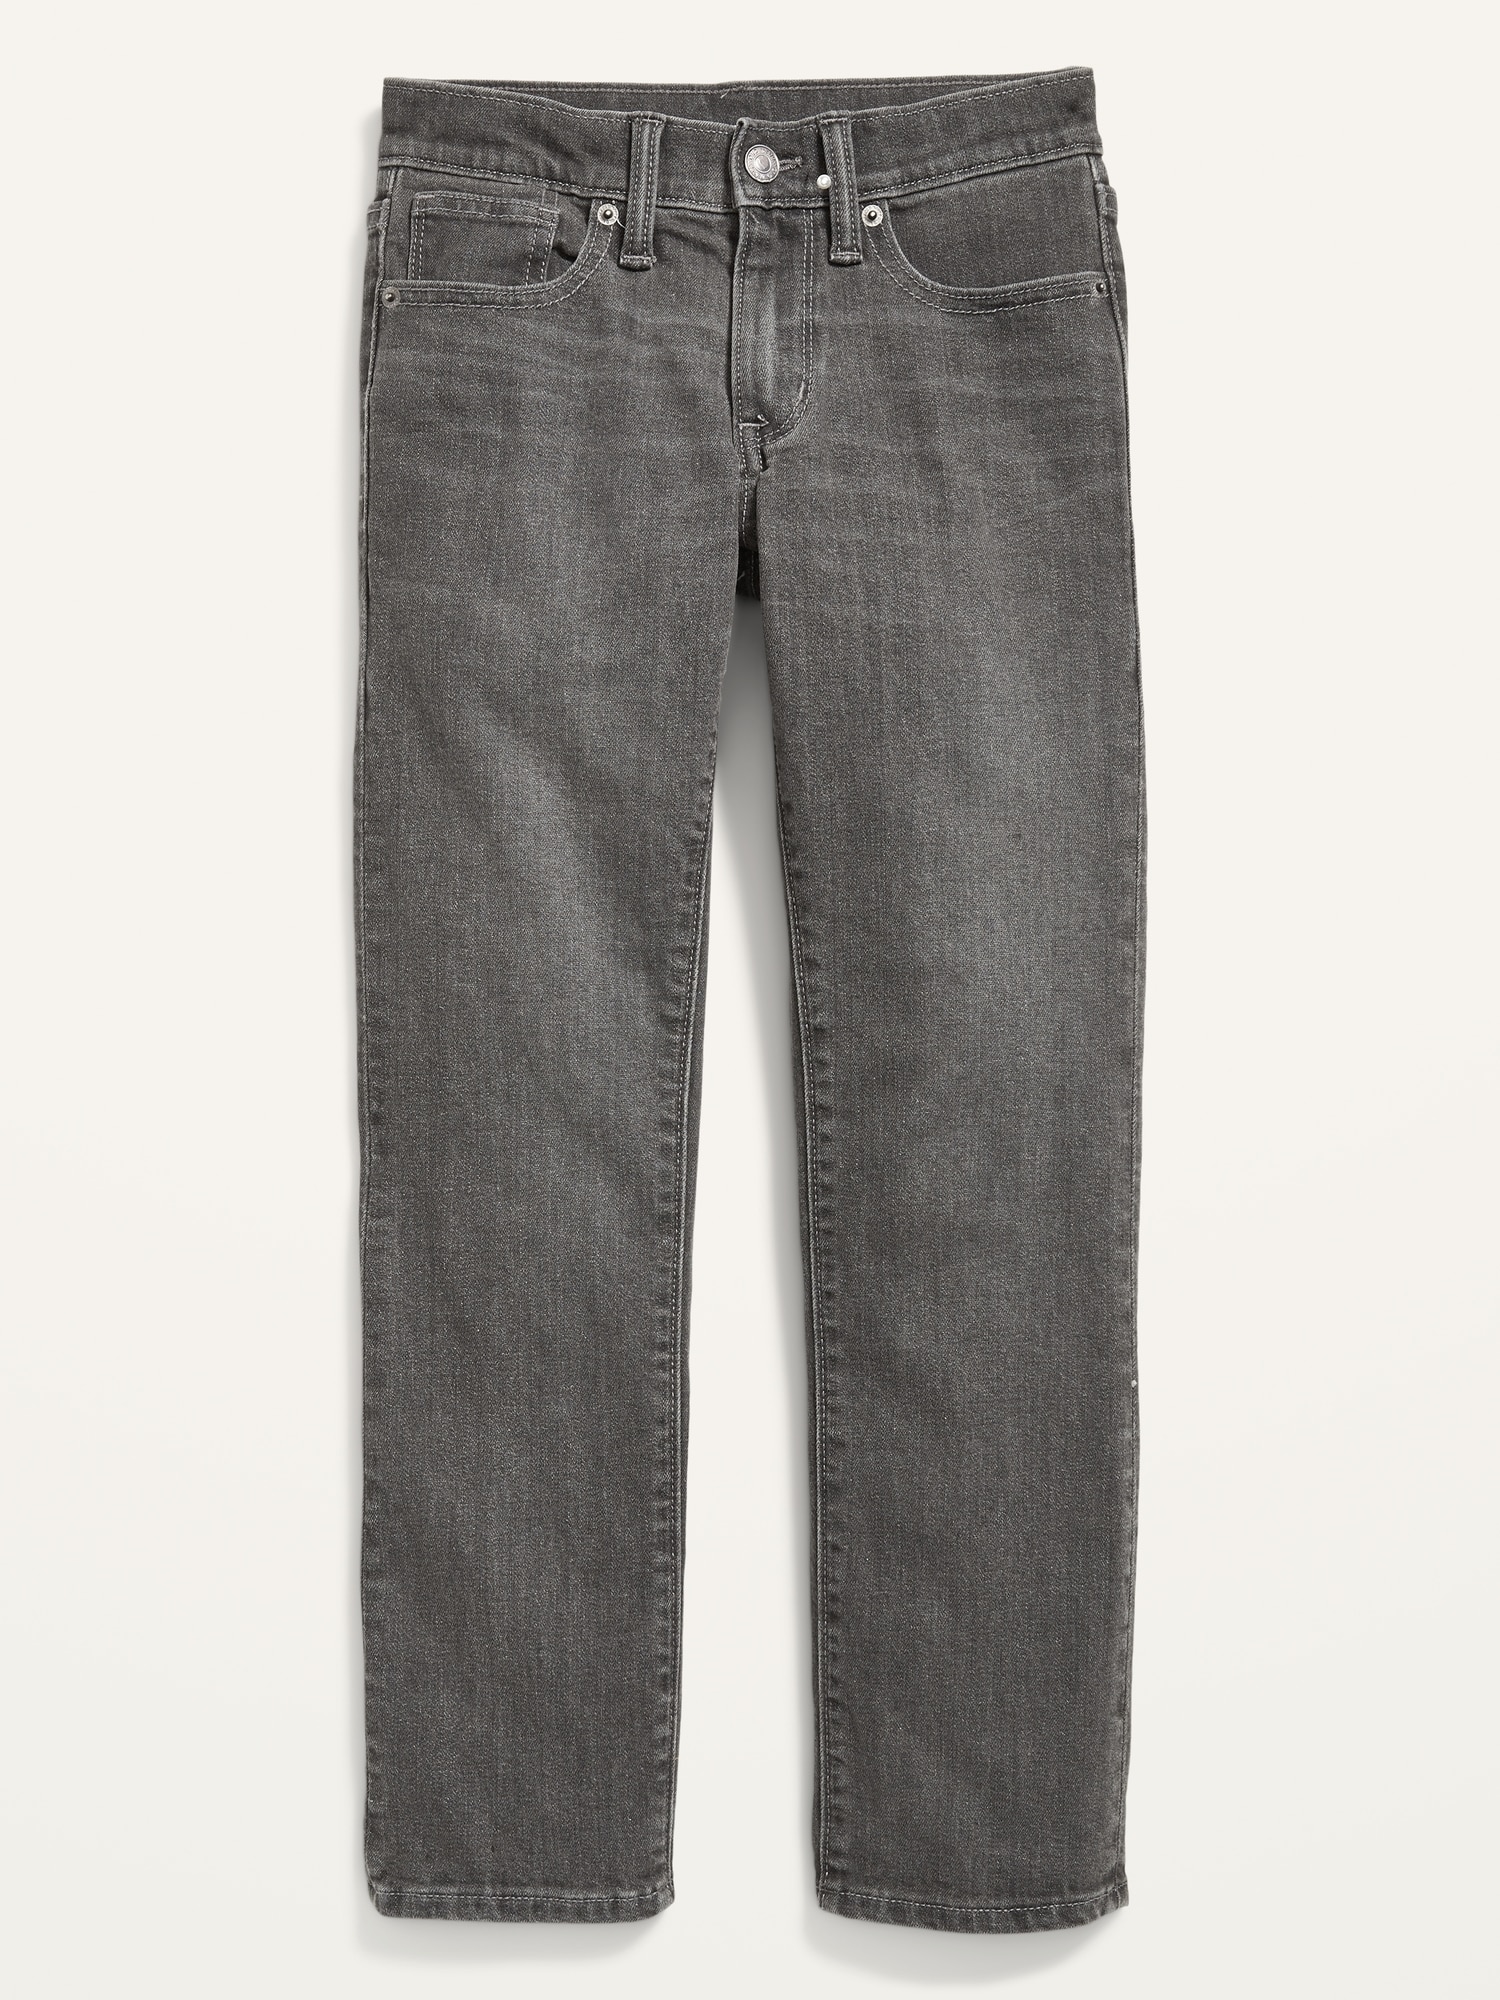 Straight Built-In Flex Gray Jeans | Old Navy